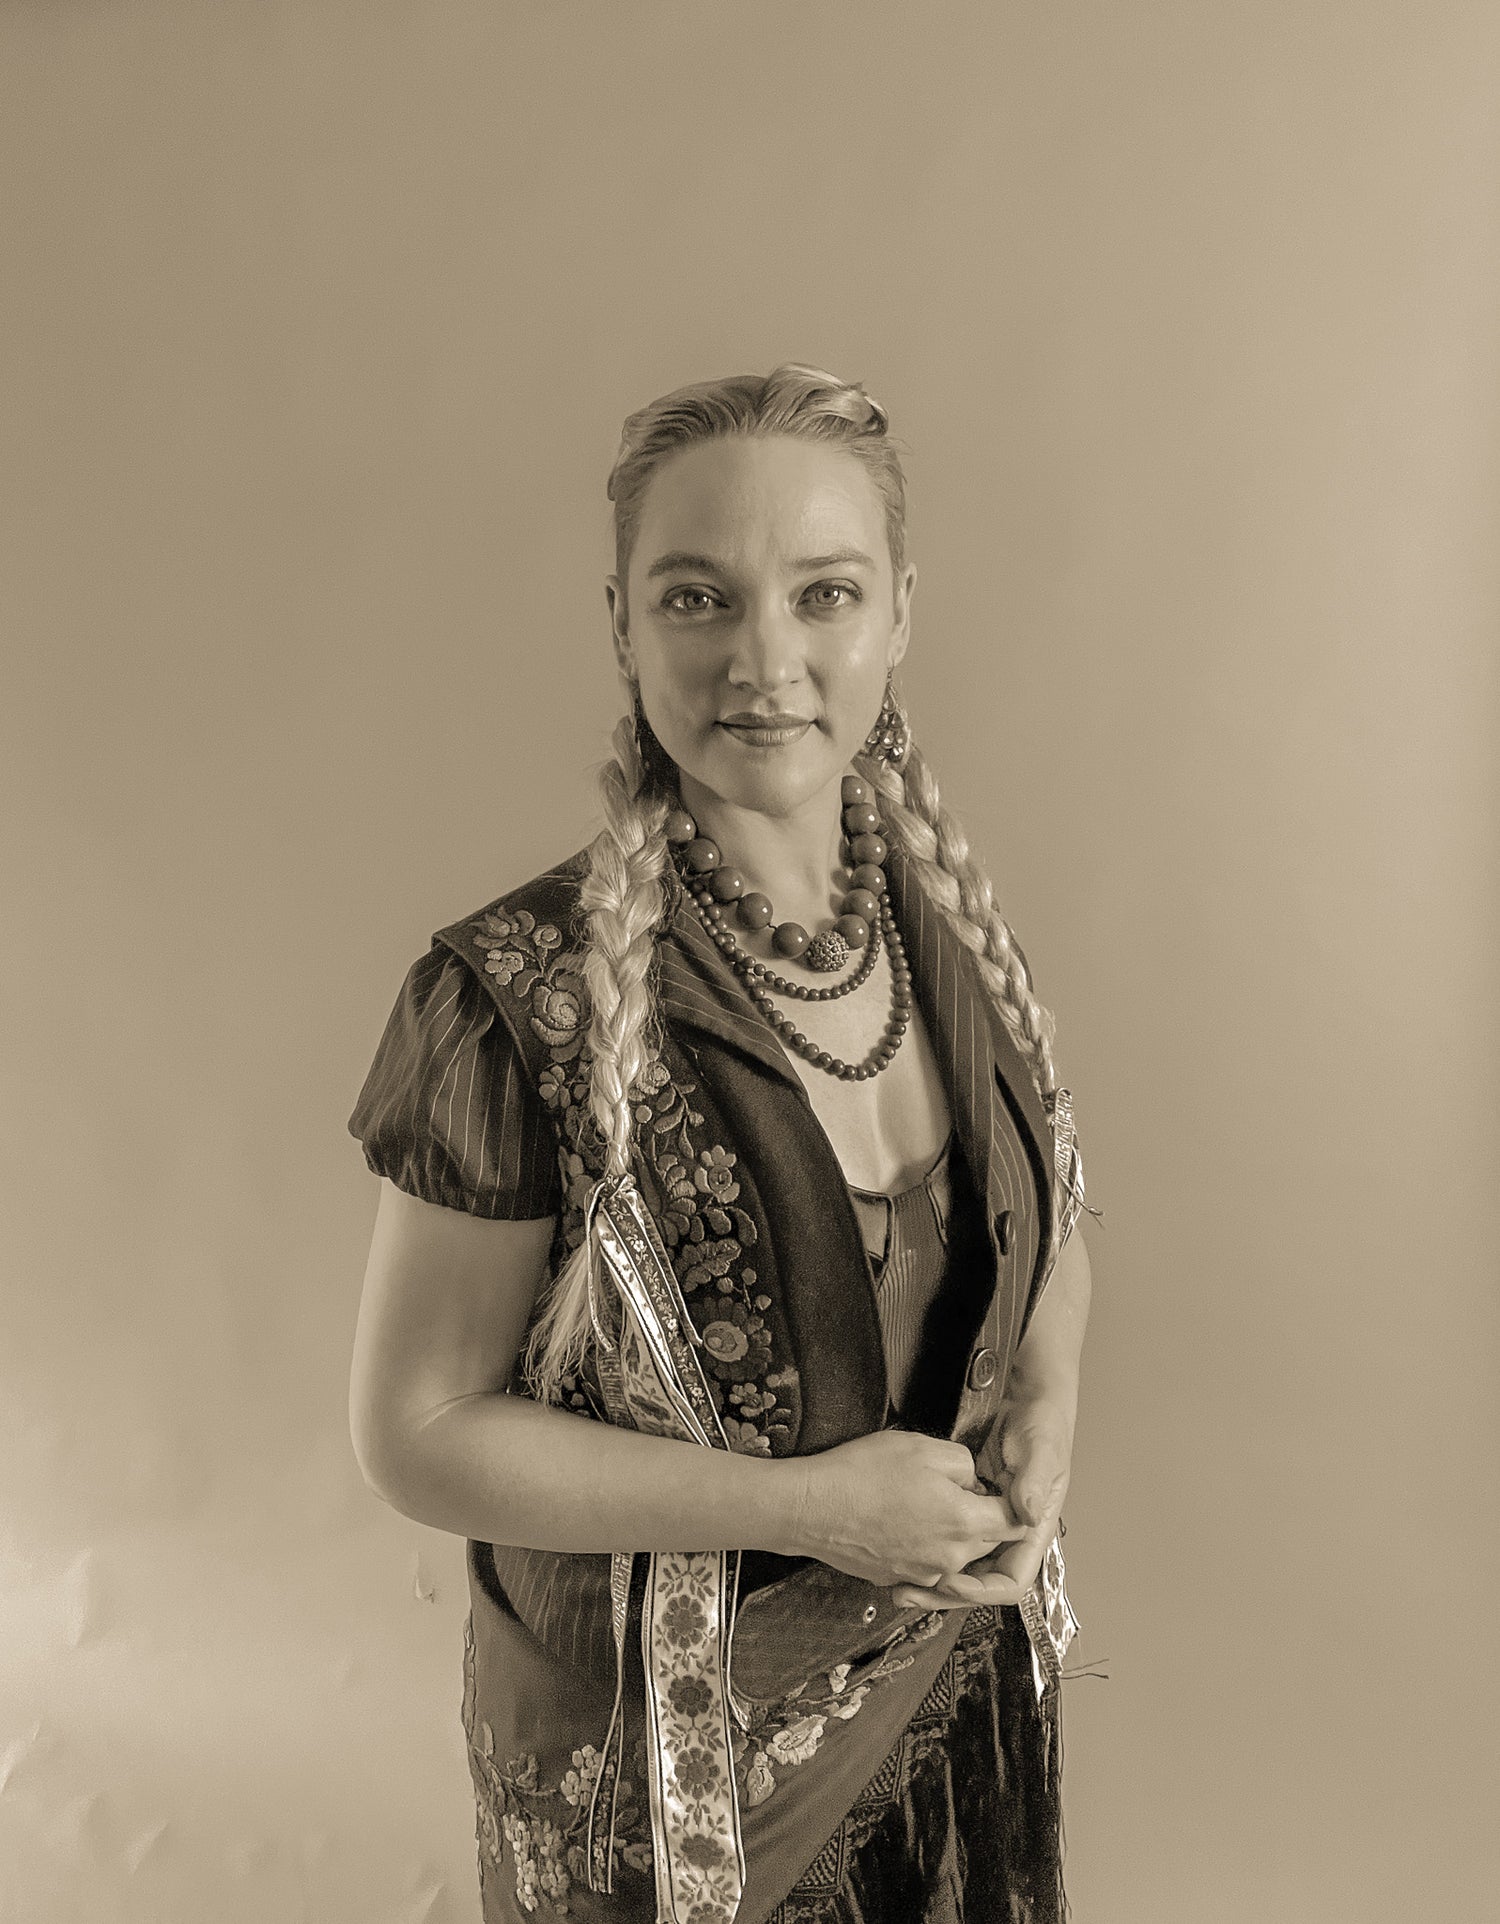 Krisztianna stands in her studio in a sepia tone image, wearing her Hungarian Folk attire and hair style